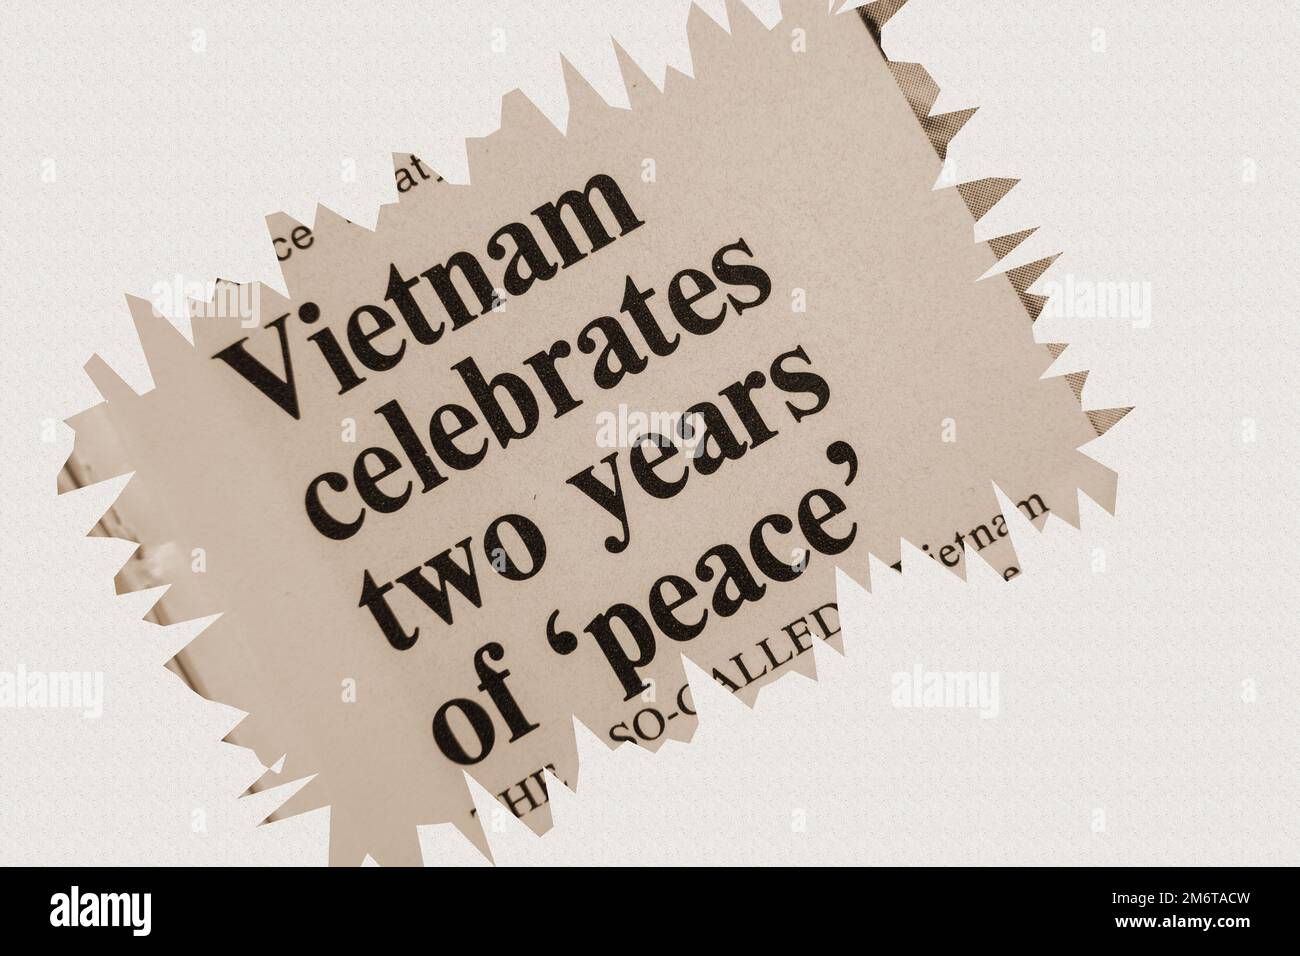 news story from 1975 newspaper headline article title - Vietnam celebrates two years of peace - overlay sepia Stock Photo